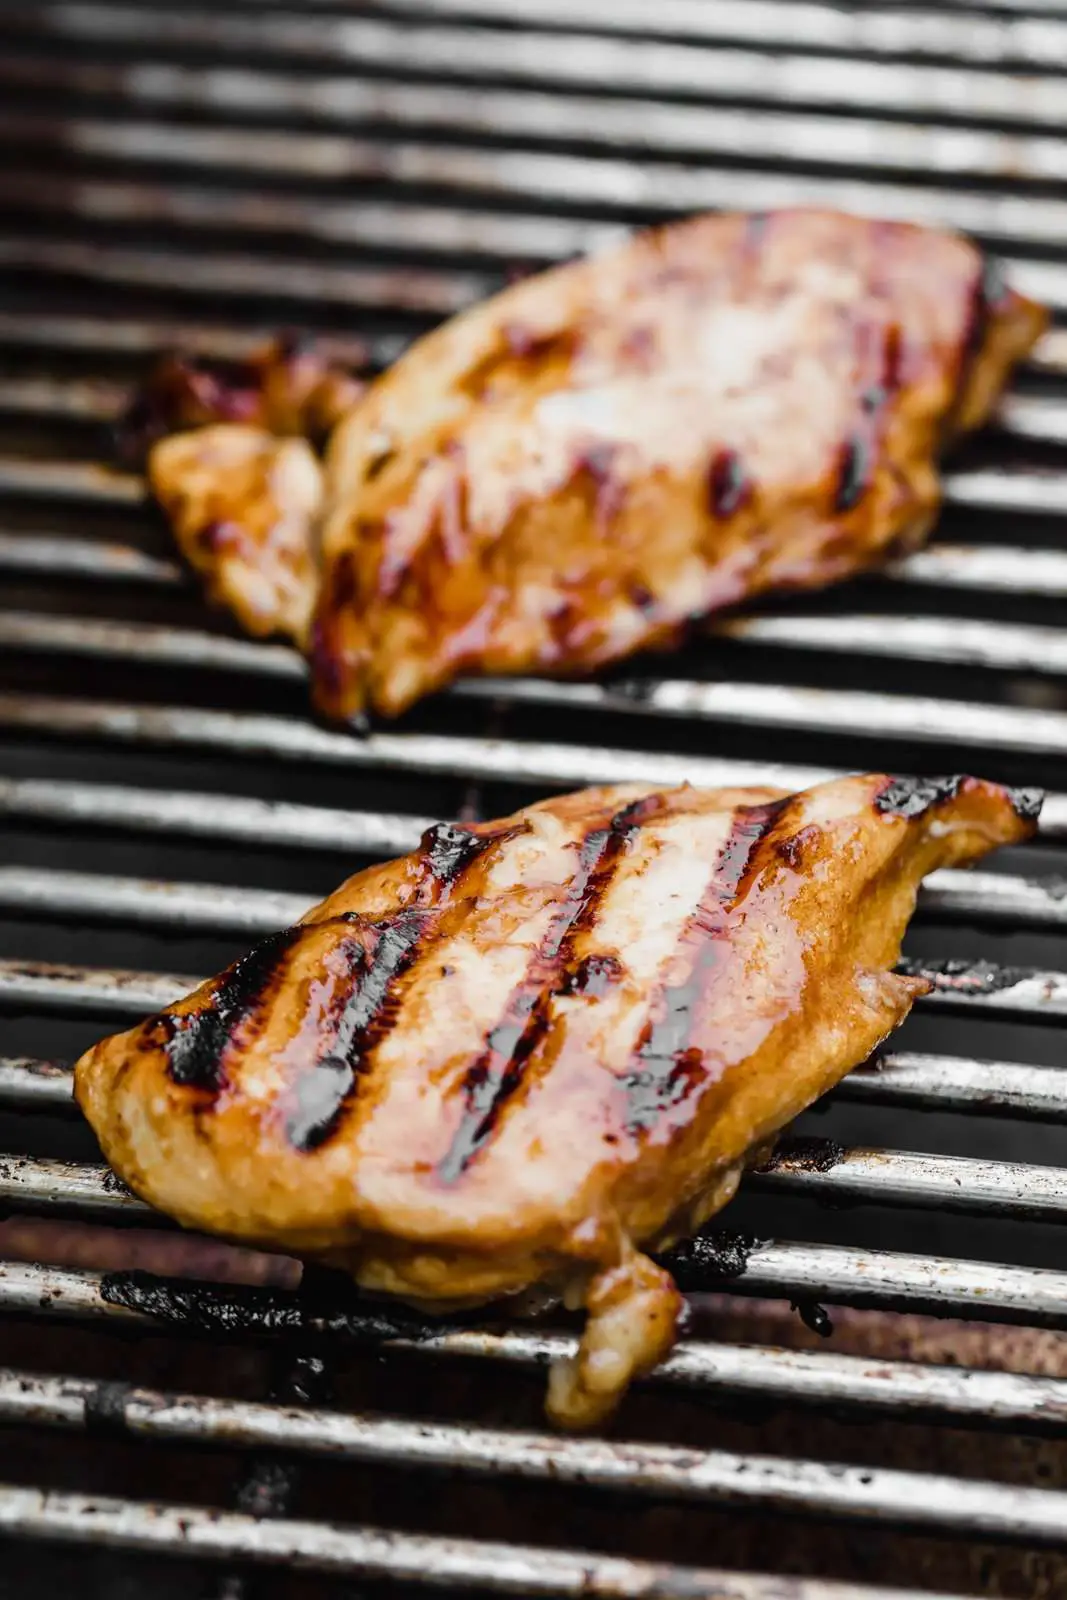 How to Grill Chicken Breast That